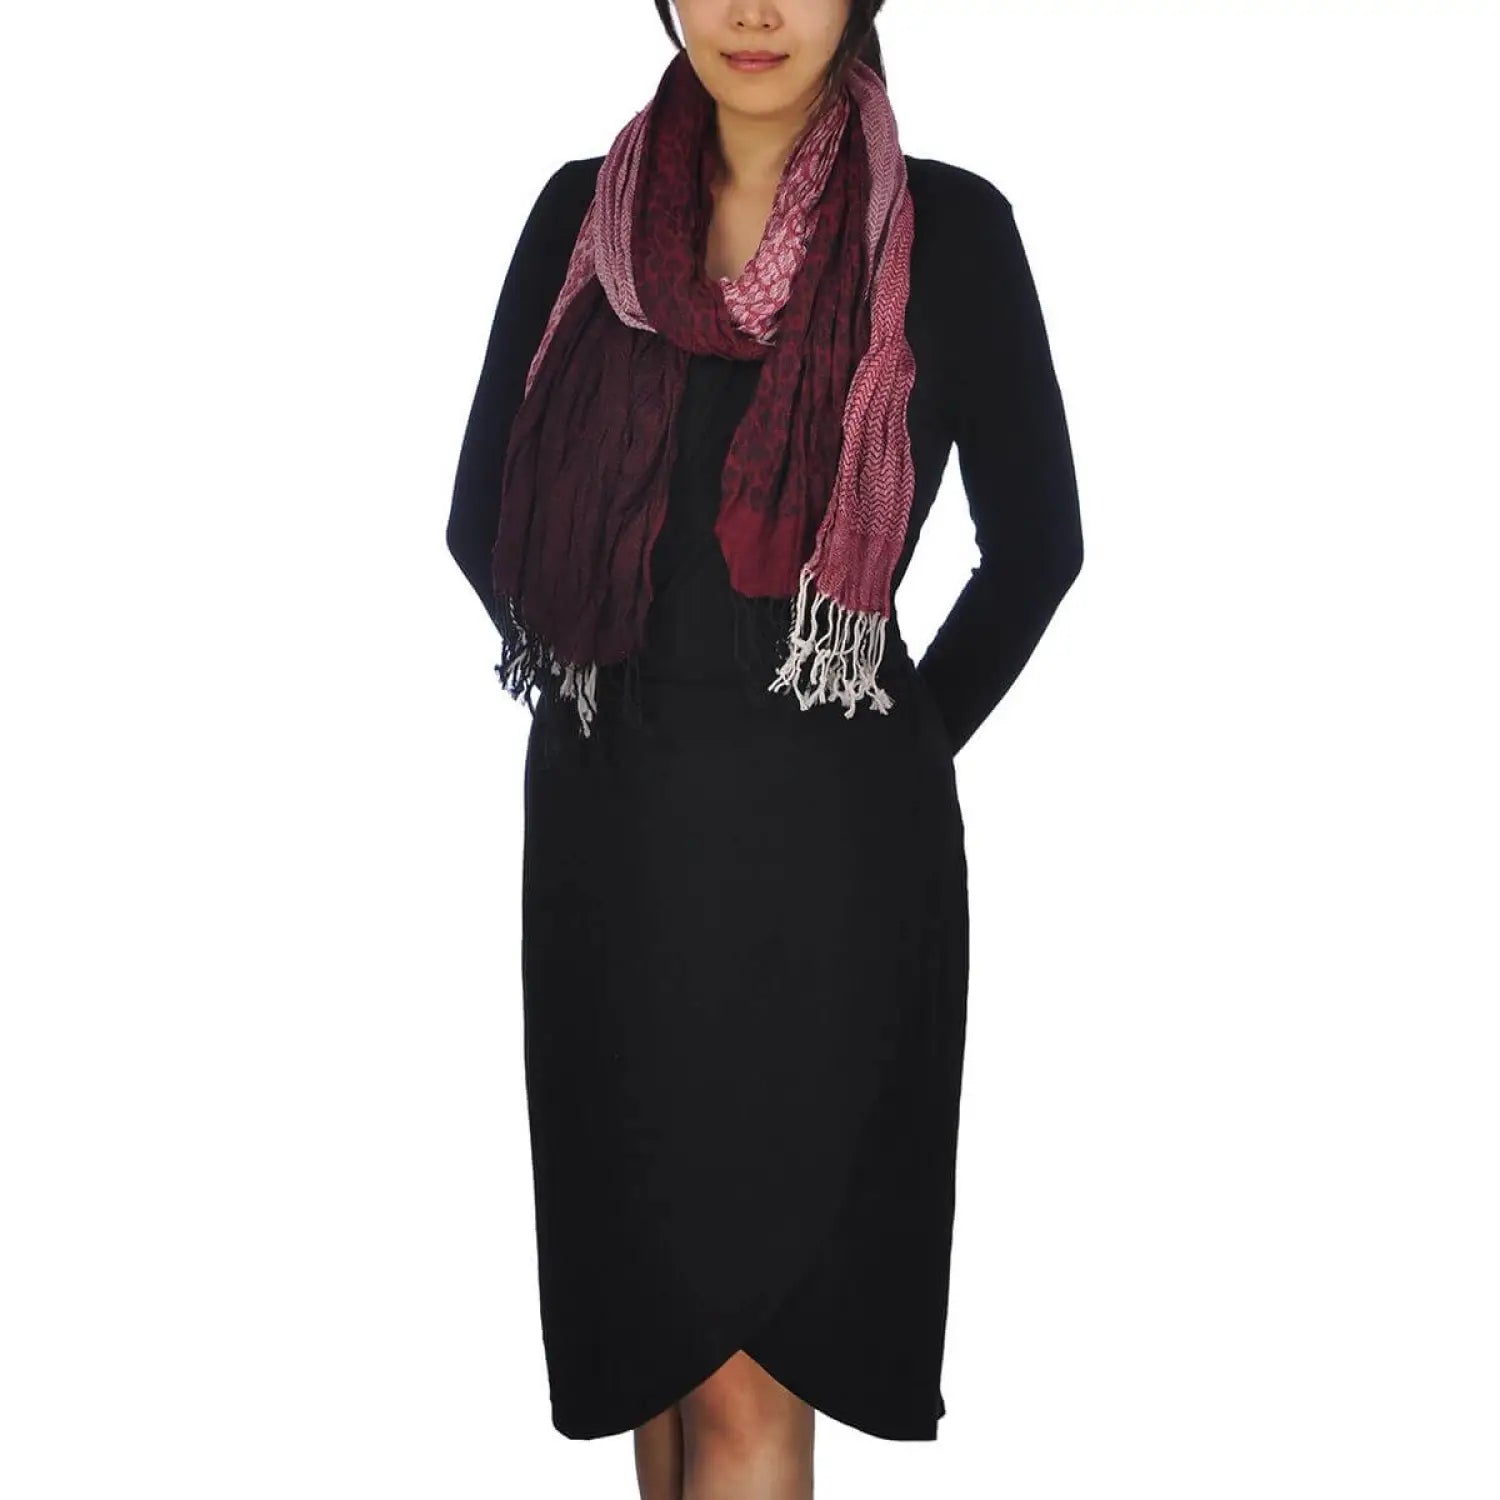 Woman in black dress and maroon scarf – Chic Crinkled Stripes & Leopard Print Tasselled Scarf